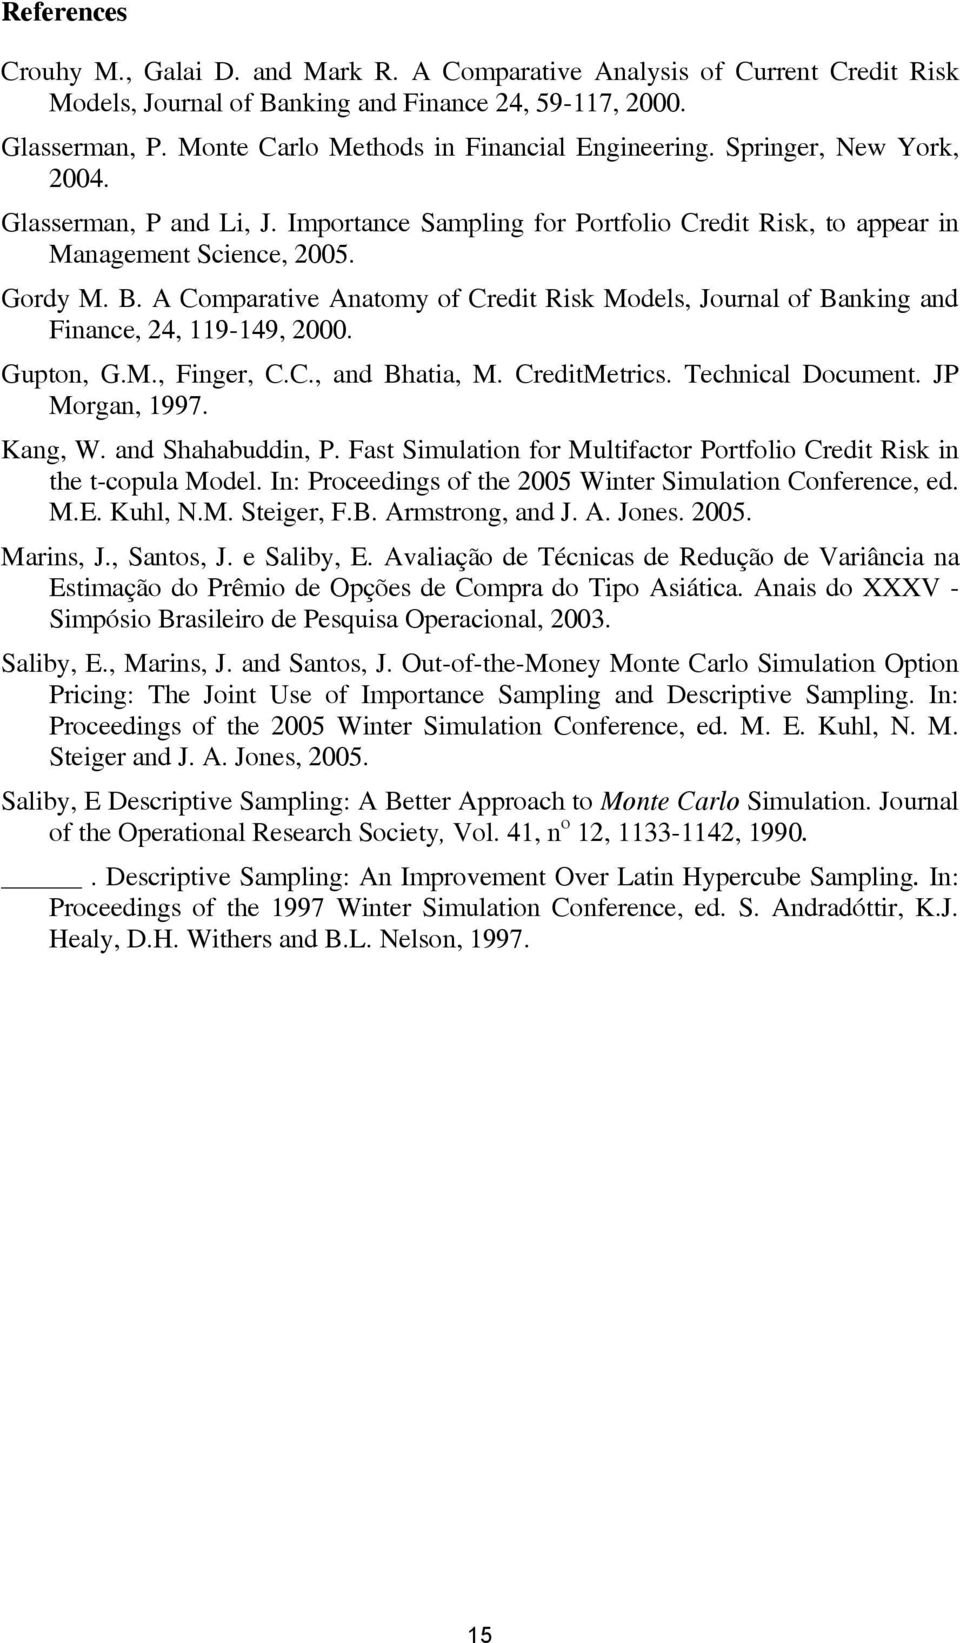 A Comparative Anatomy of Credit Ris Models, Journal of Baning and Finance, 24, 9-49, 2000. Gupton, G.M., Finger, C.C., and Bhatia, M. CreditMetrics. Technical Document. JP Morgan, 997. Kang, W.